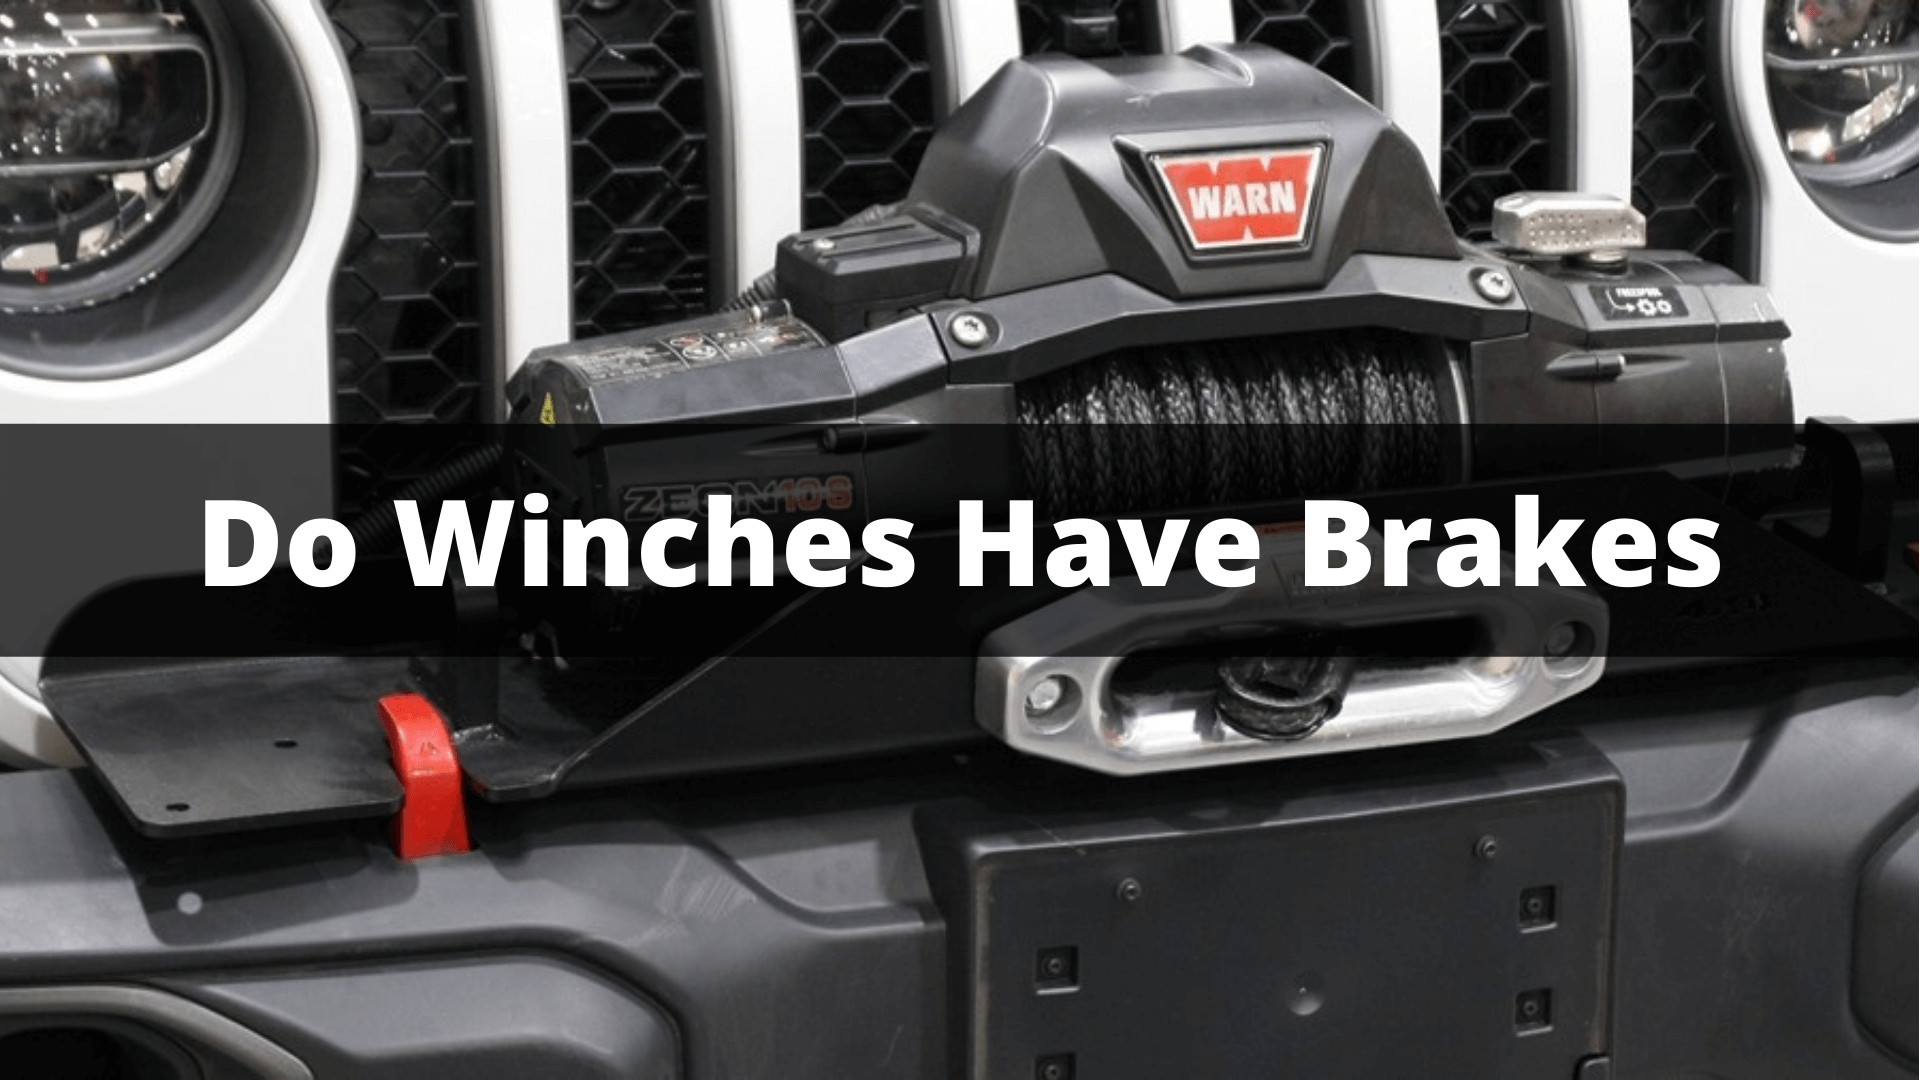 Do Winches Have Brakes